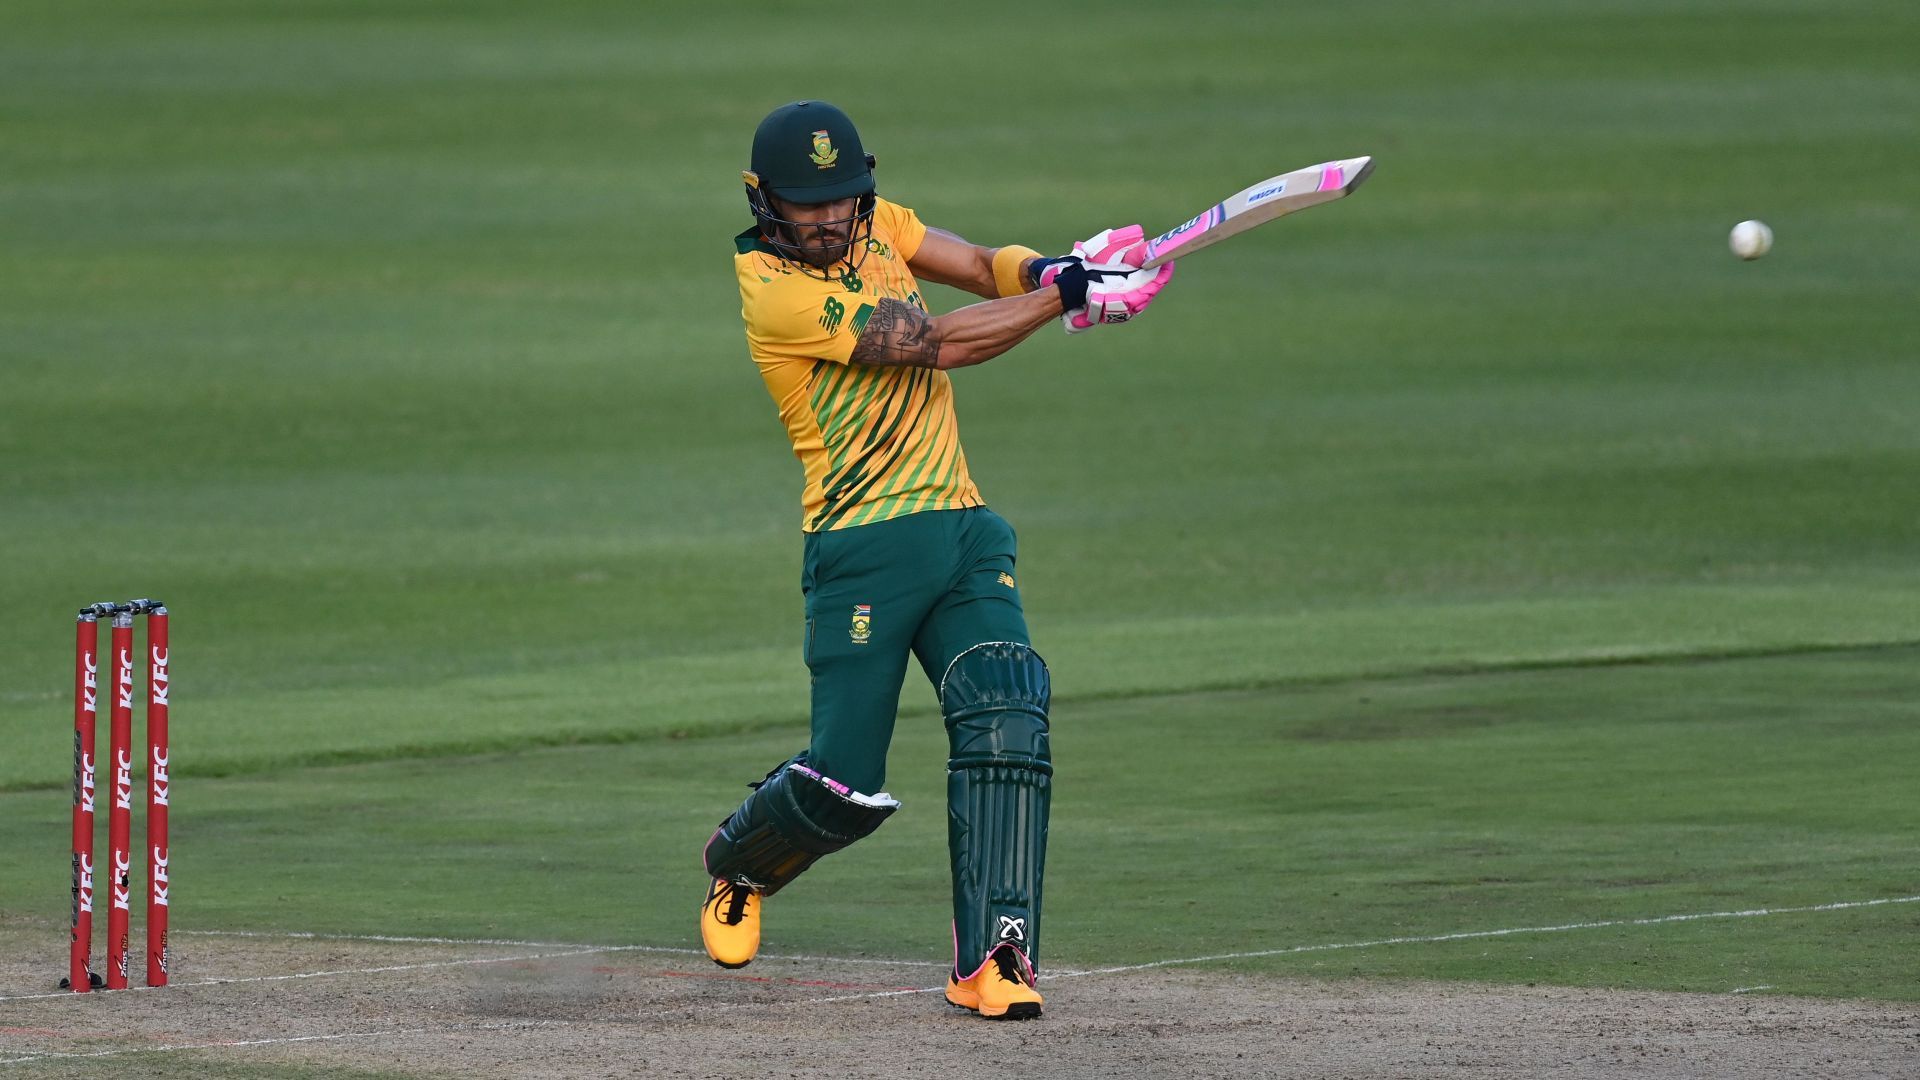 Faf du Plessis will look to play a key role in this game.